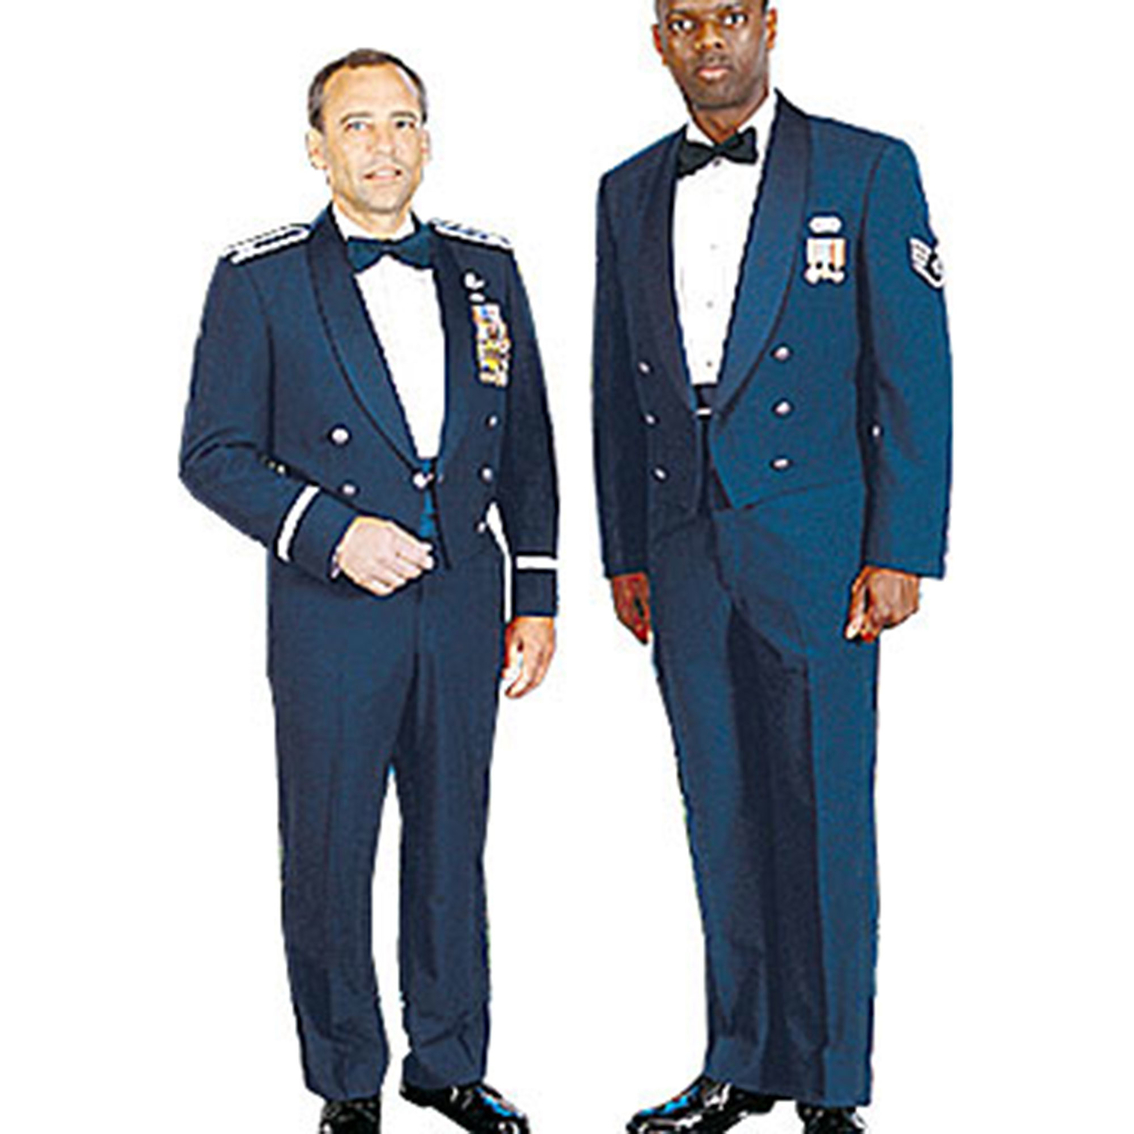 air force clothing sales